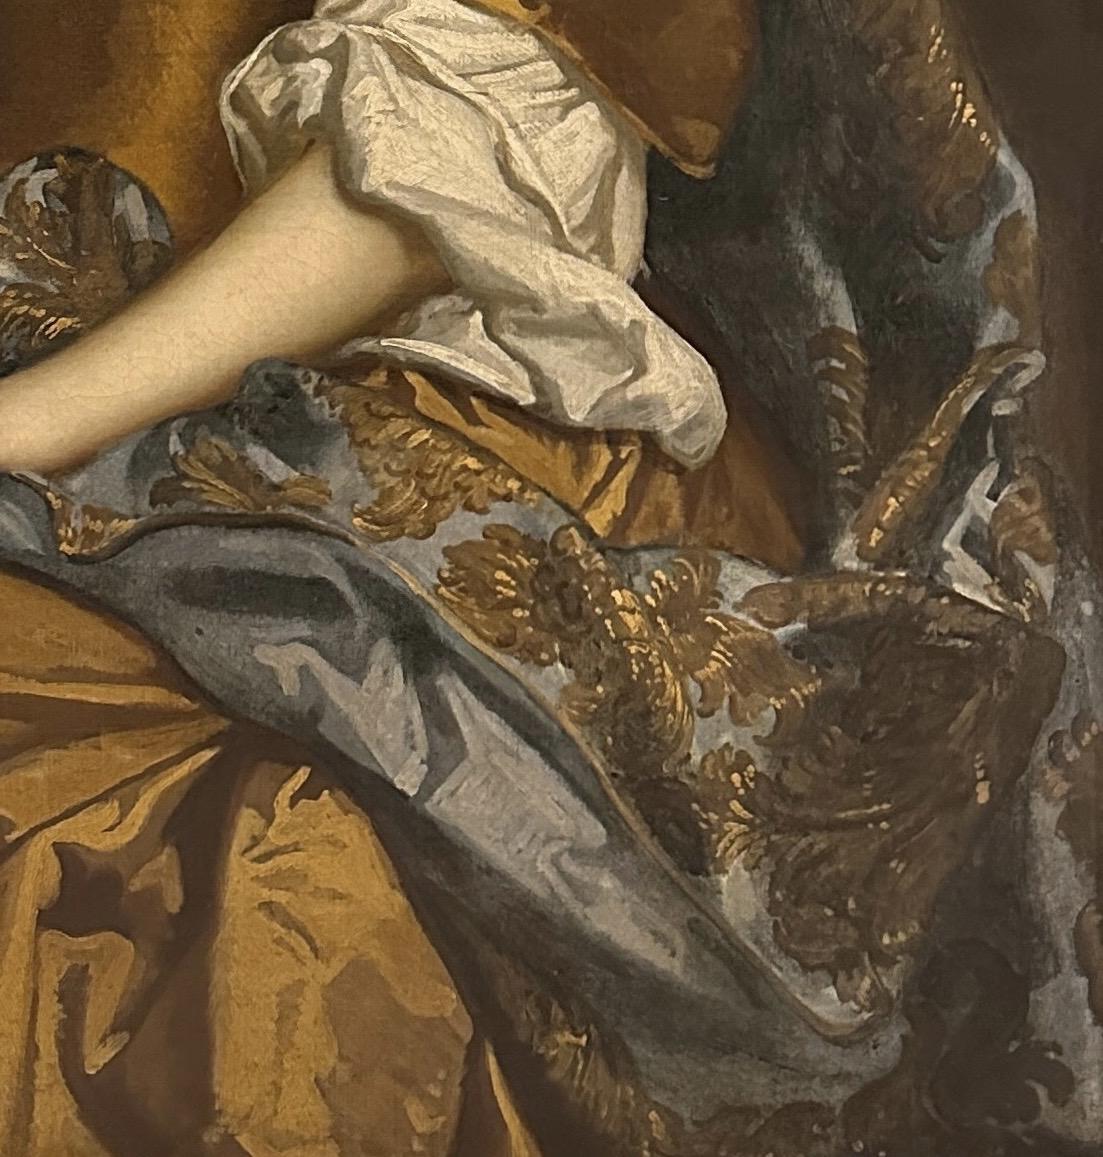 17th century portrait of Henrietta Hyde by Peter Lely and Studio